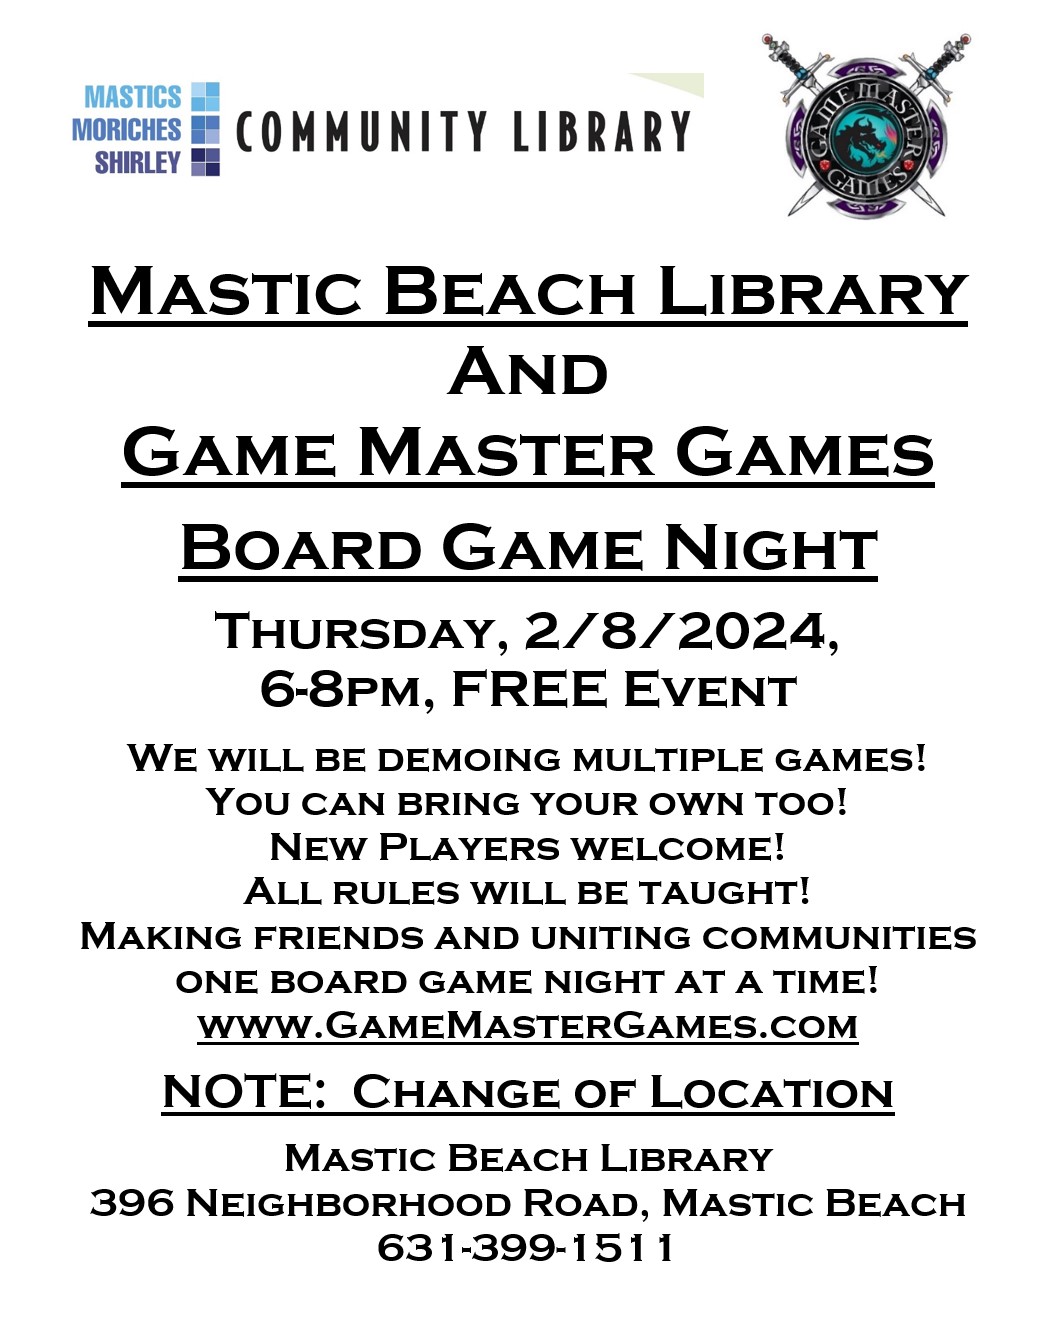 Make some new friends and have fun!  Board Games at Mastic Beach Library!